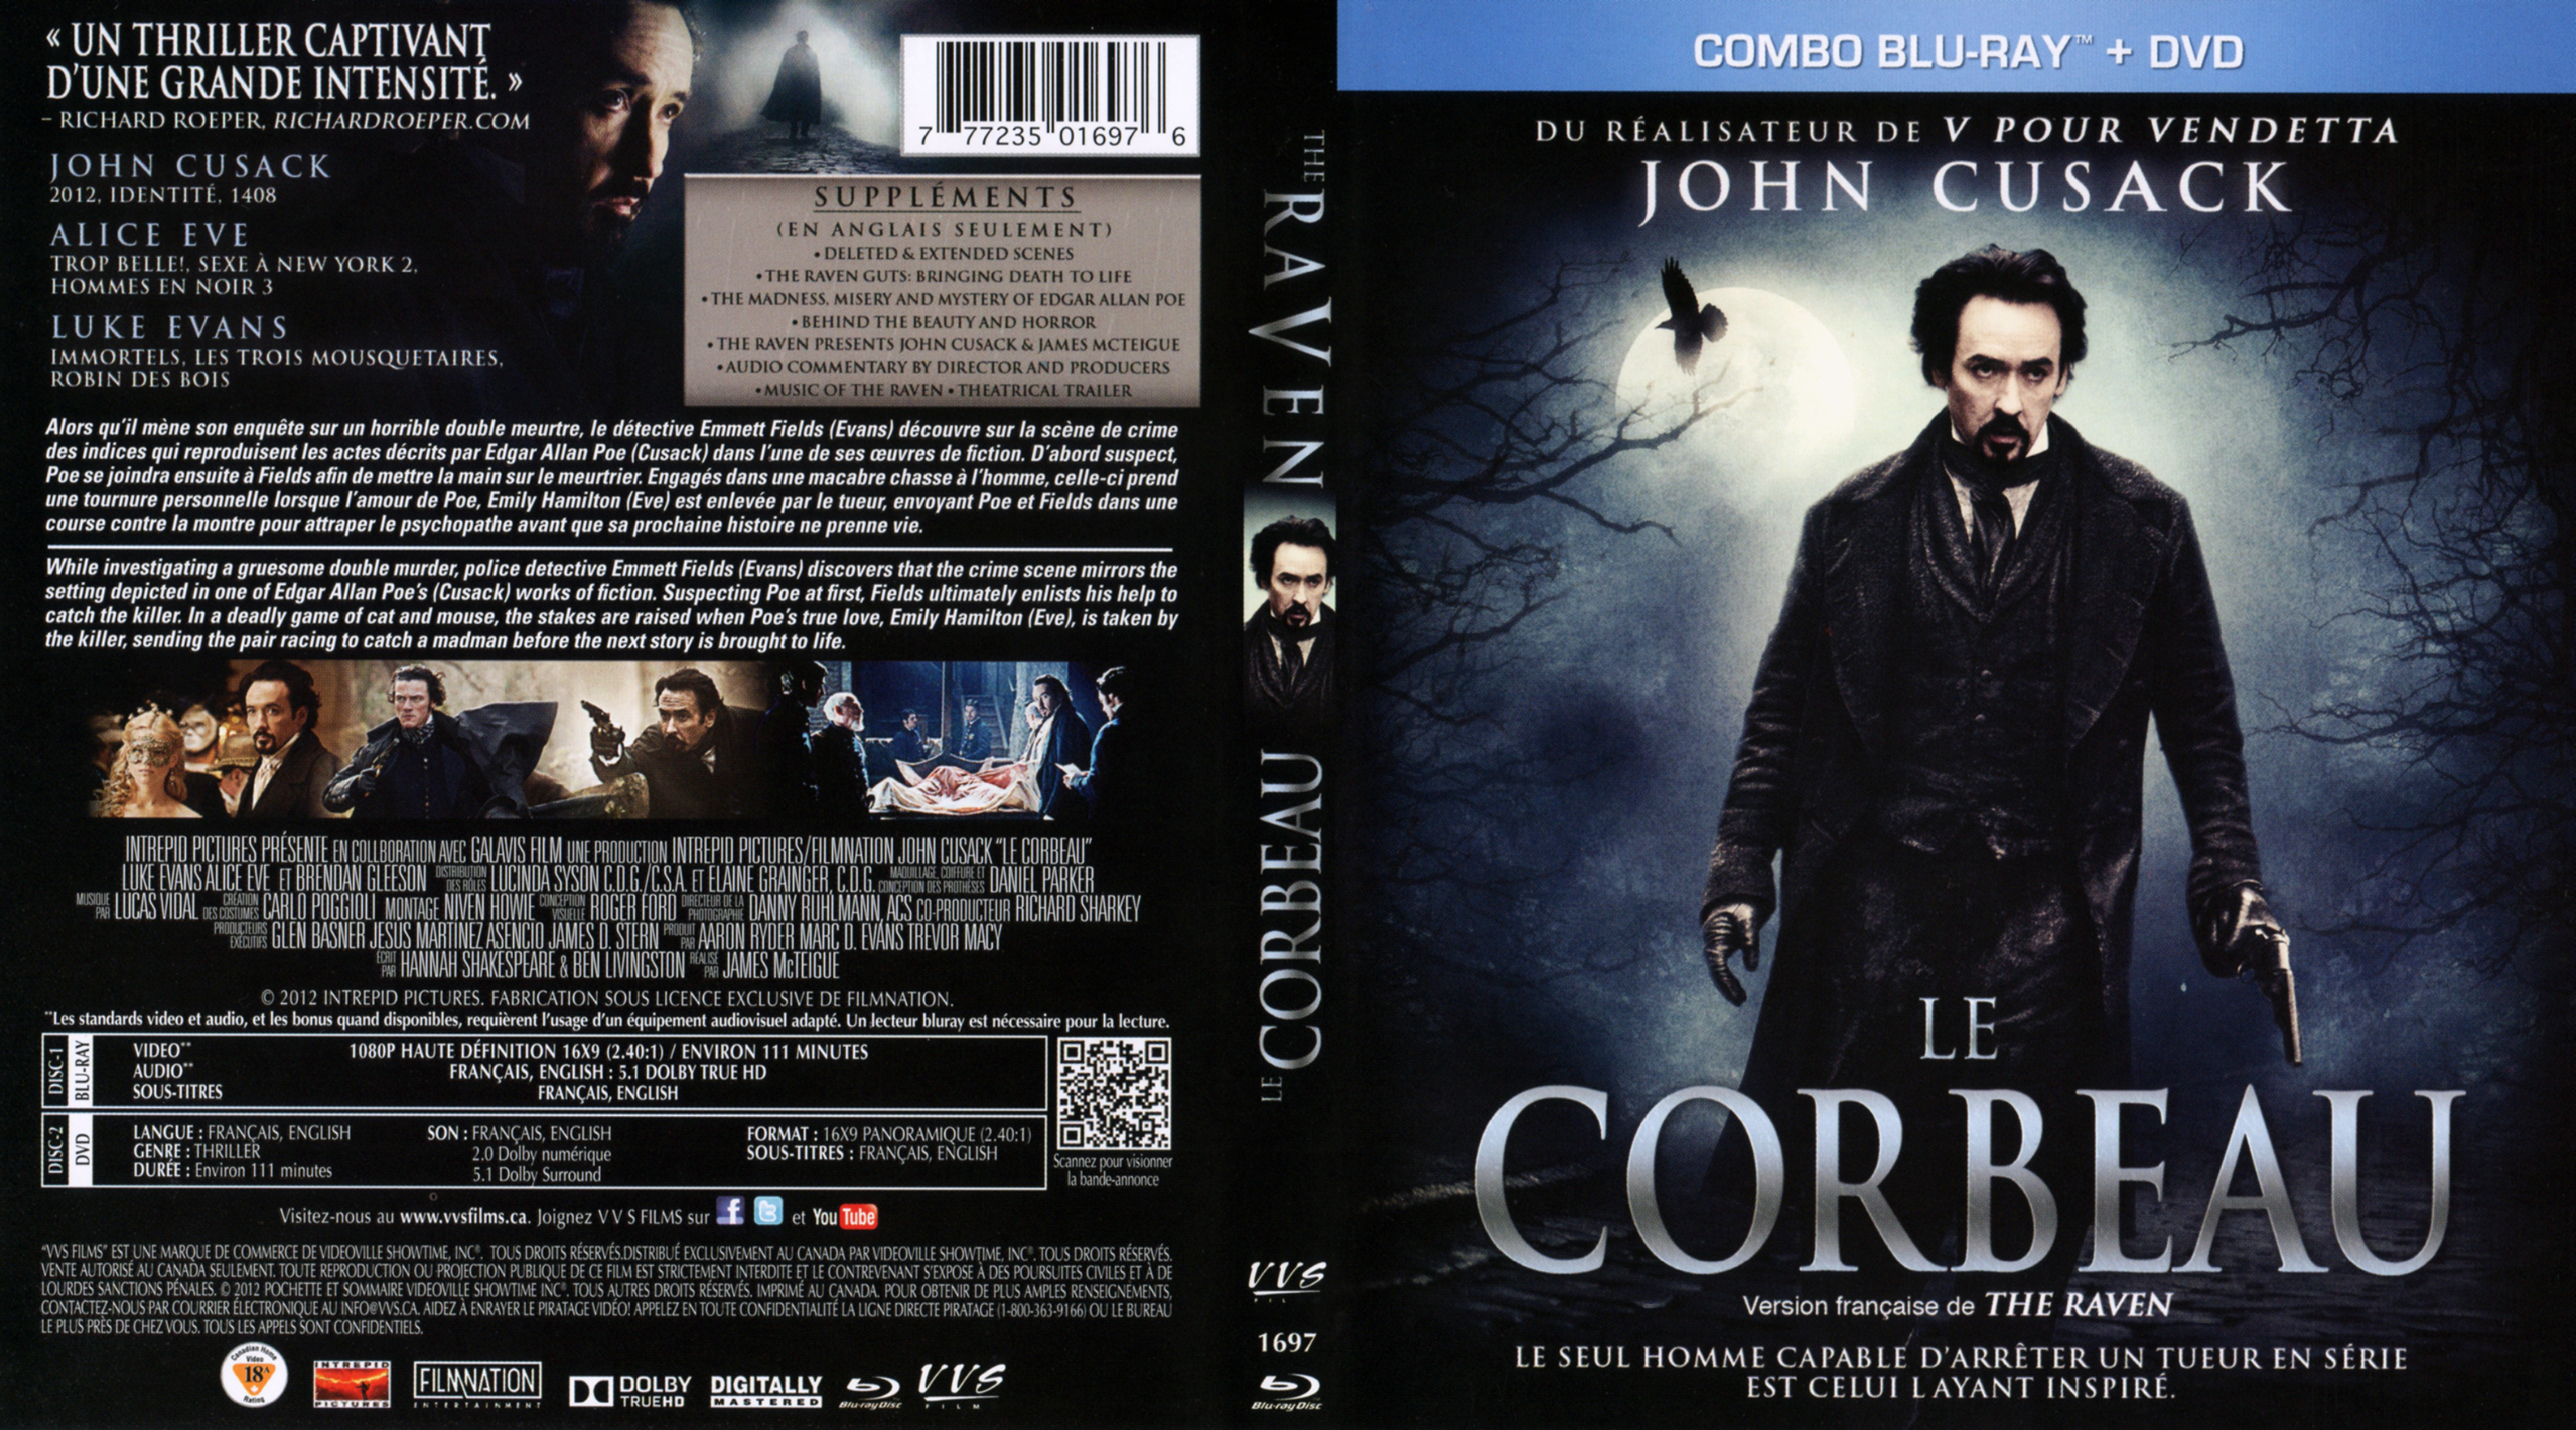 Jaquette DVD Le corbeau - The raven (Canadienne) (BLU-RAY)